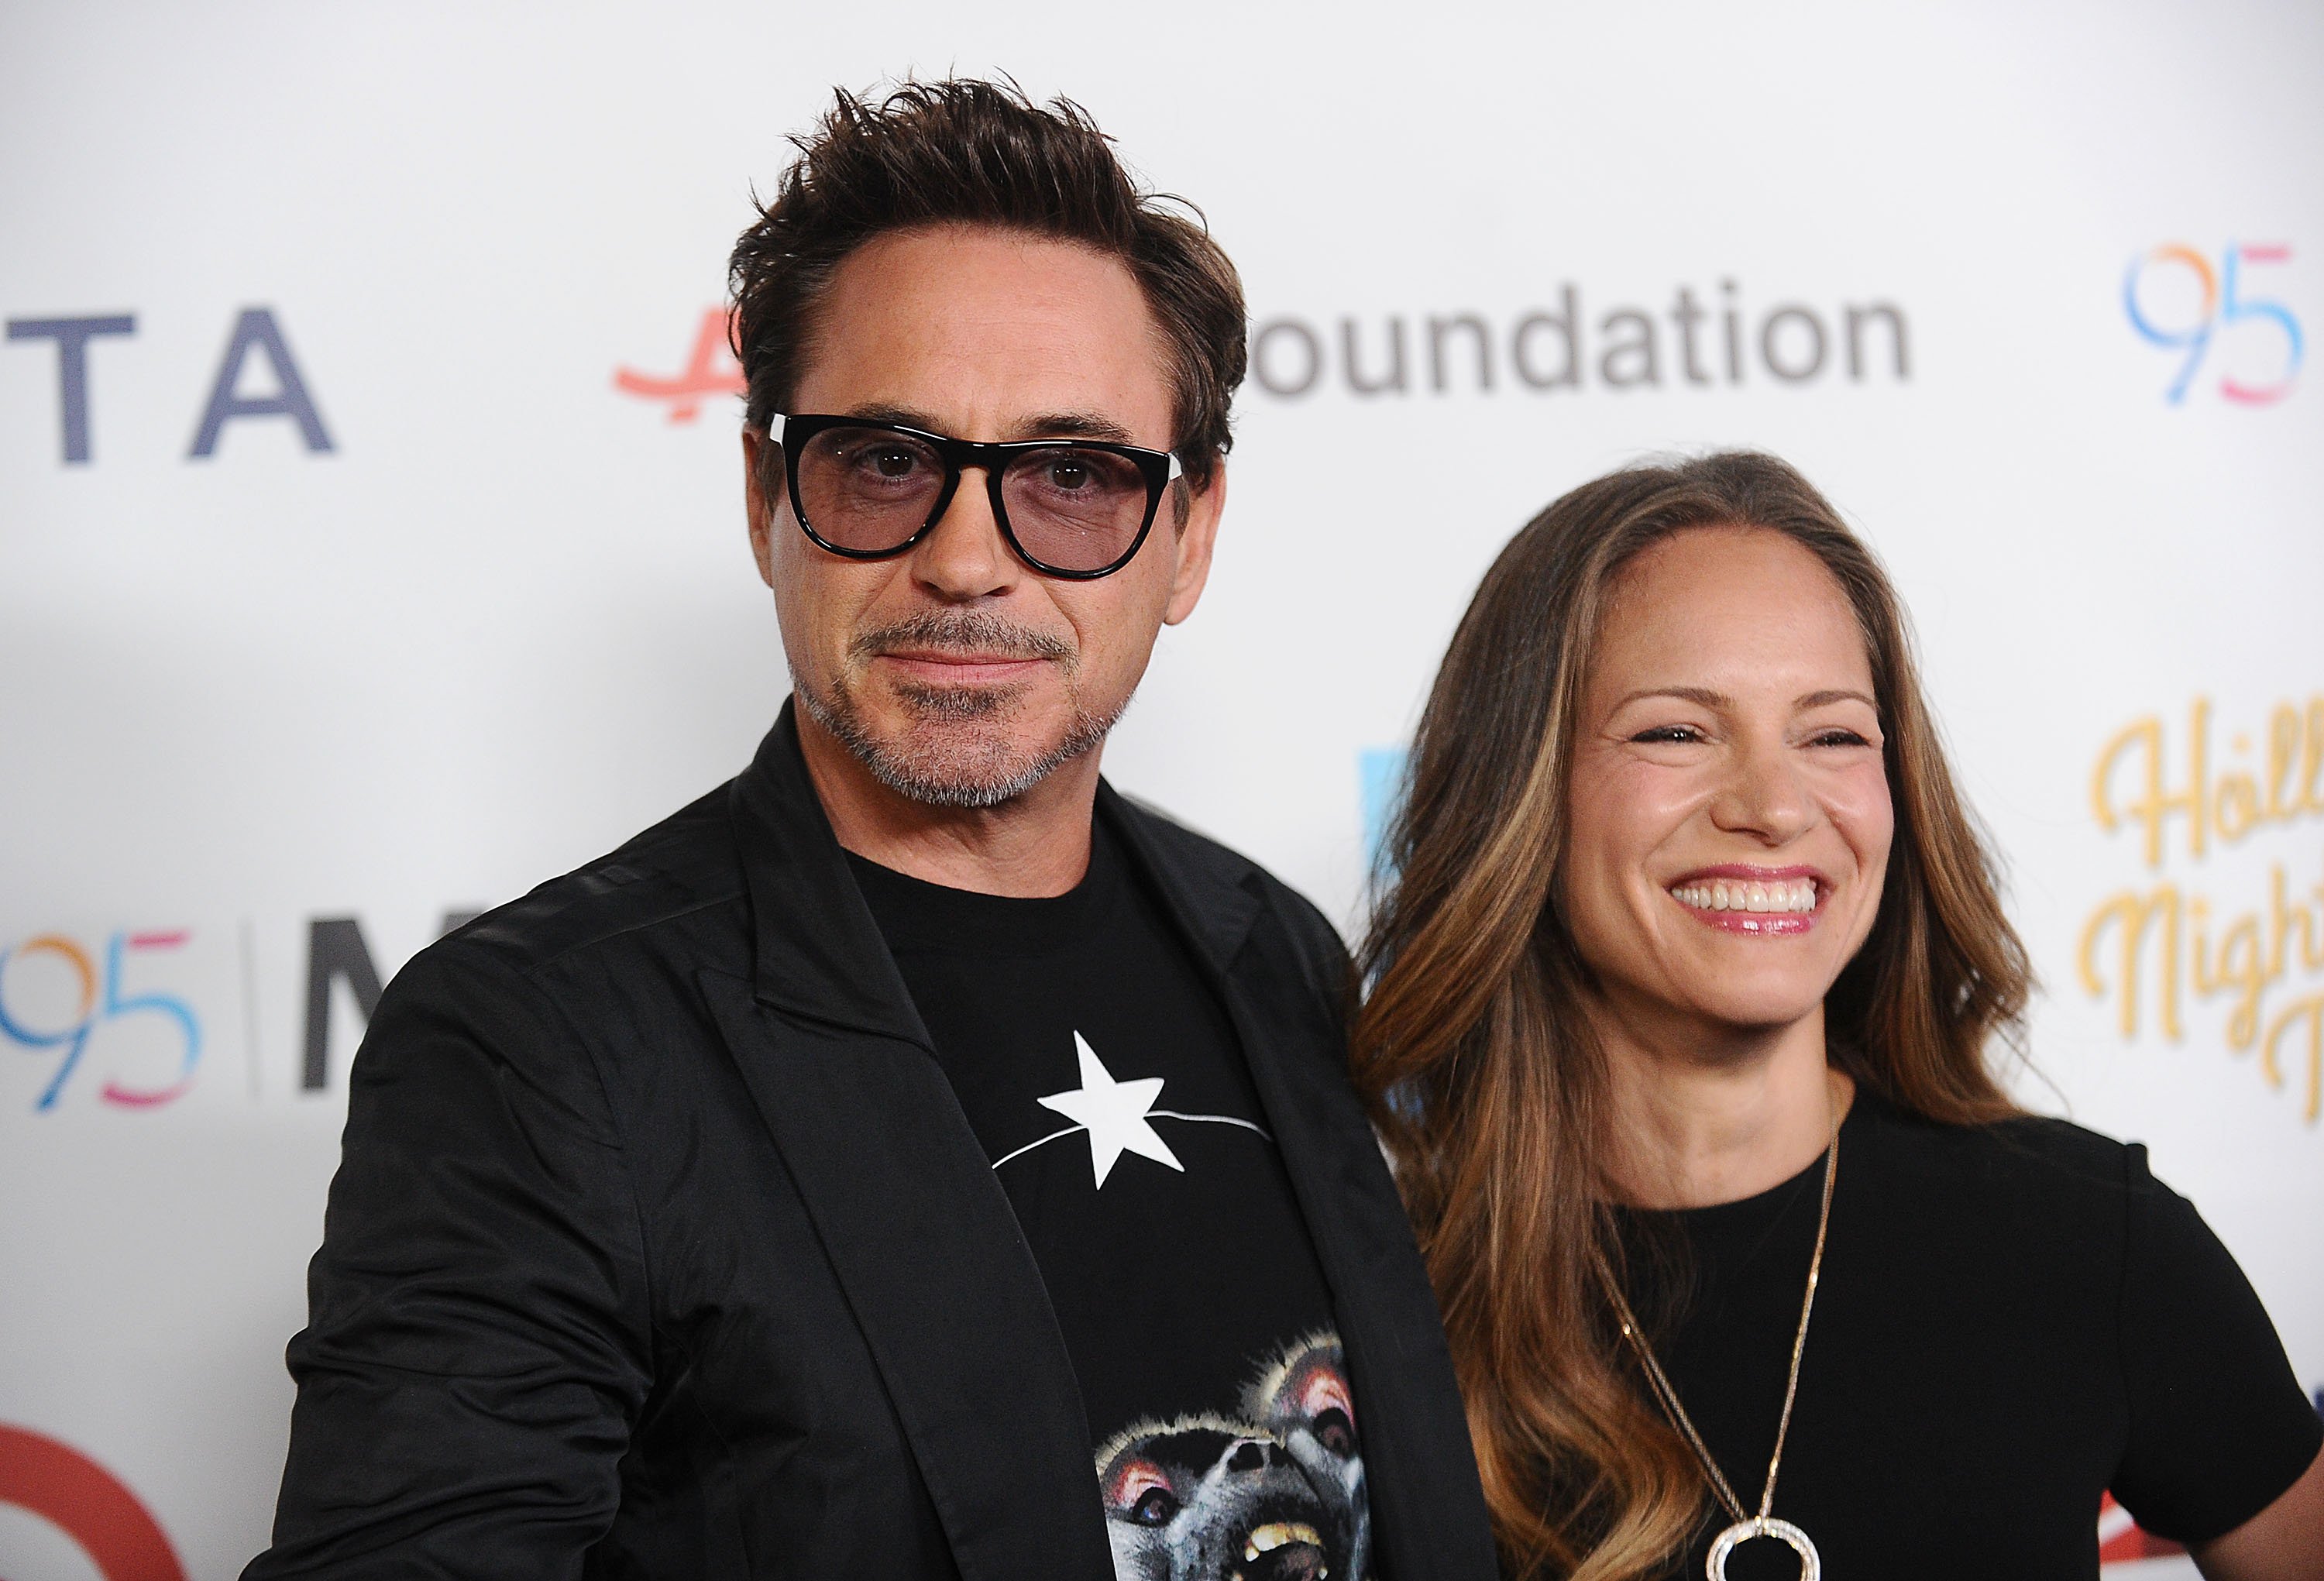 Actor Robert Downey Jr. and wife Susan Downey at the "Hollywood's Night Under The Stars" celebration in 2016, in Los Angeles. | Source: Getty Images